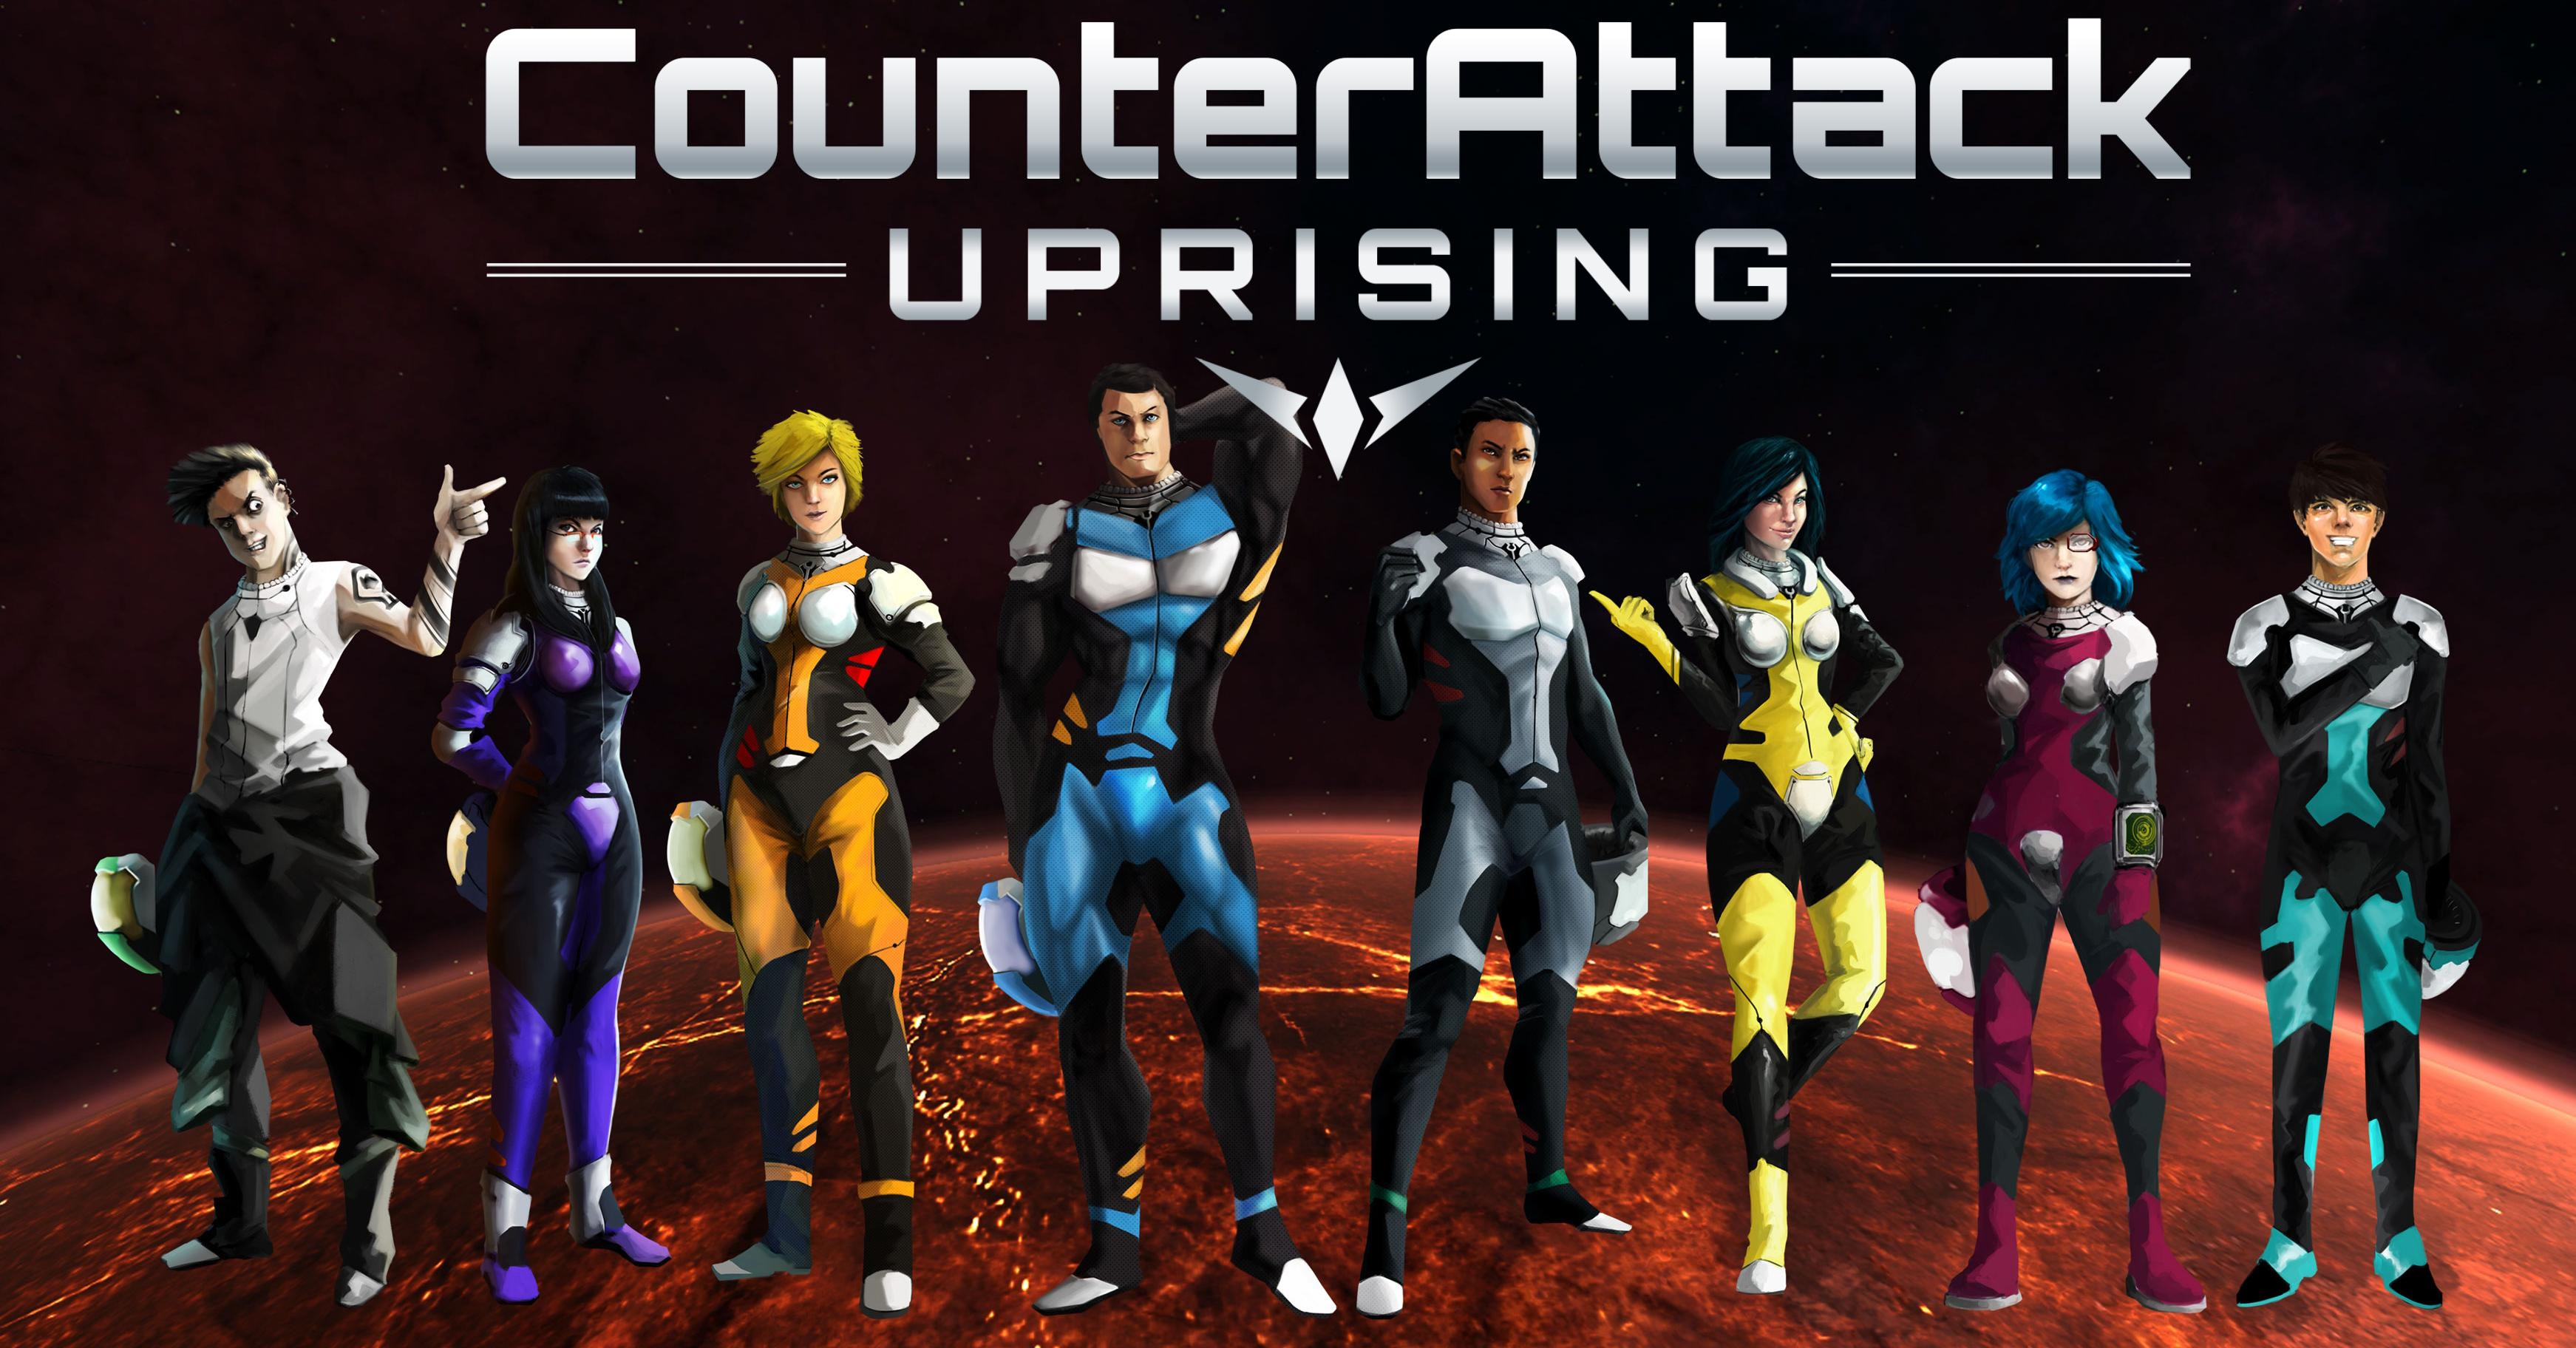 All 8 Ready For Uprising